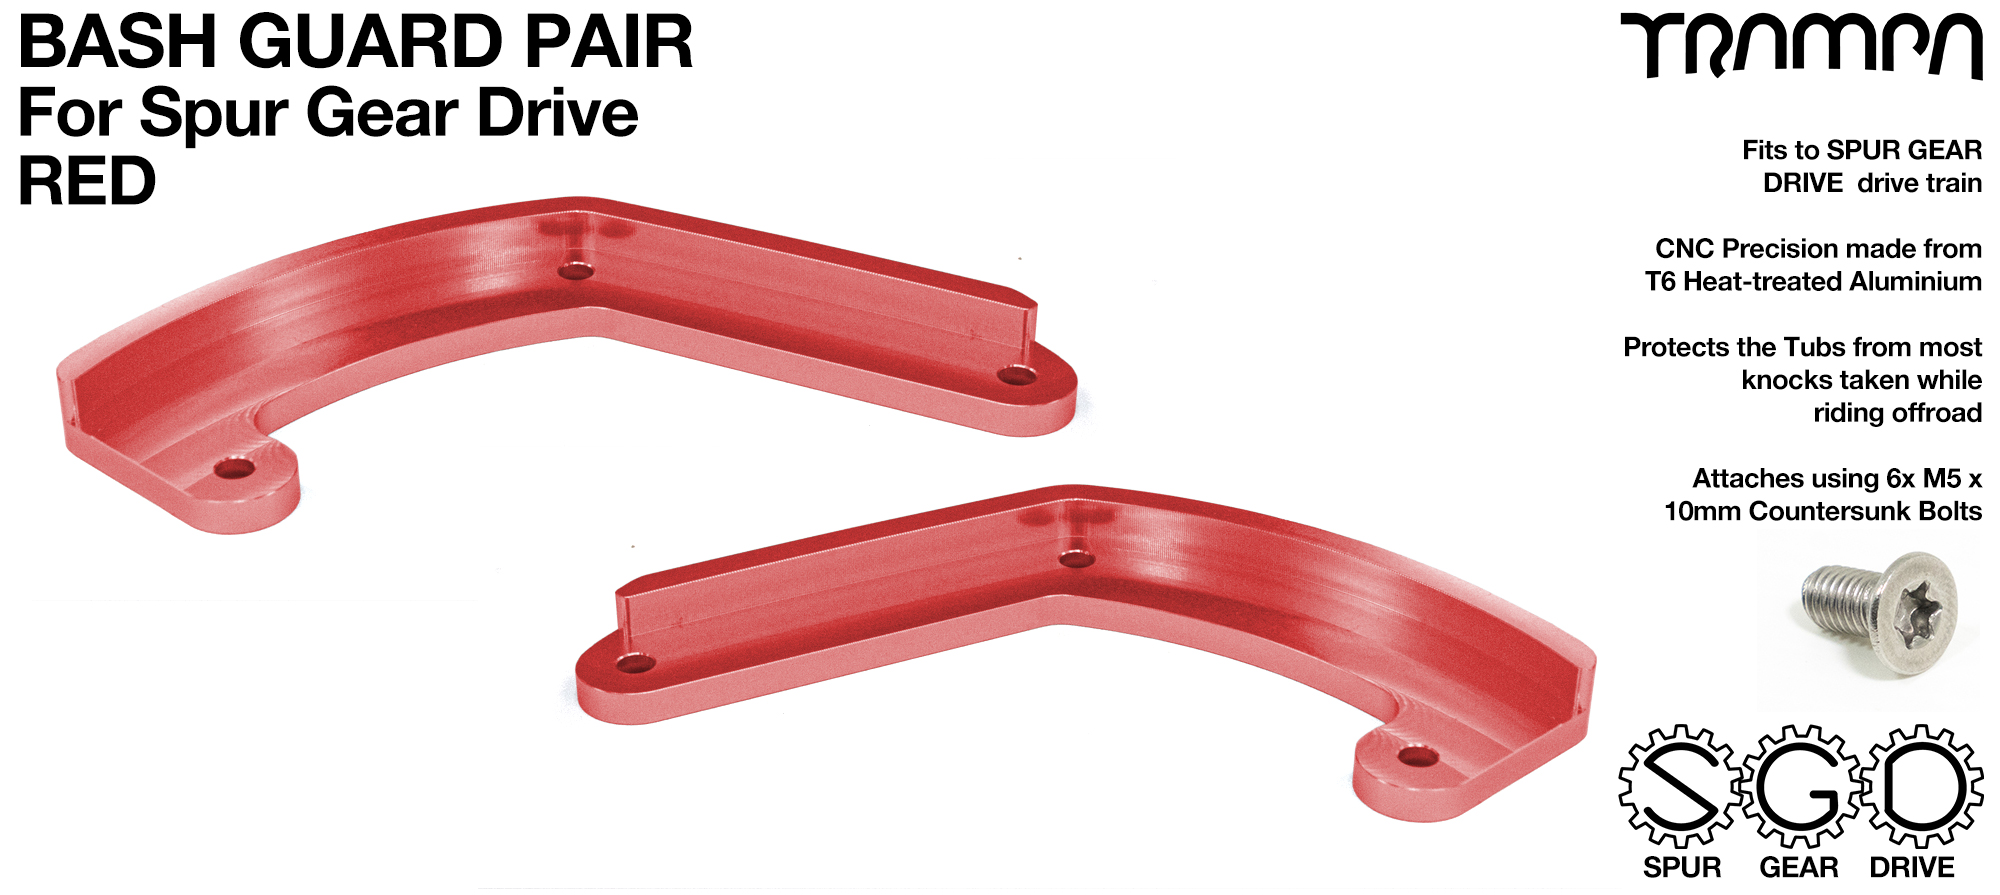 MkII Spur Gear Drive Bash Guards PAIR - RED